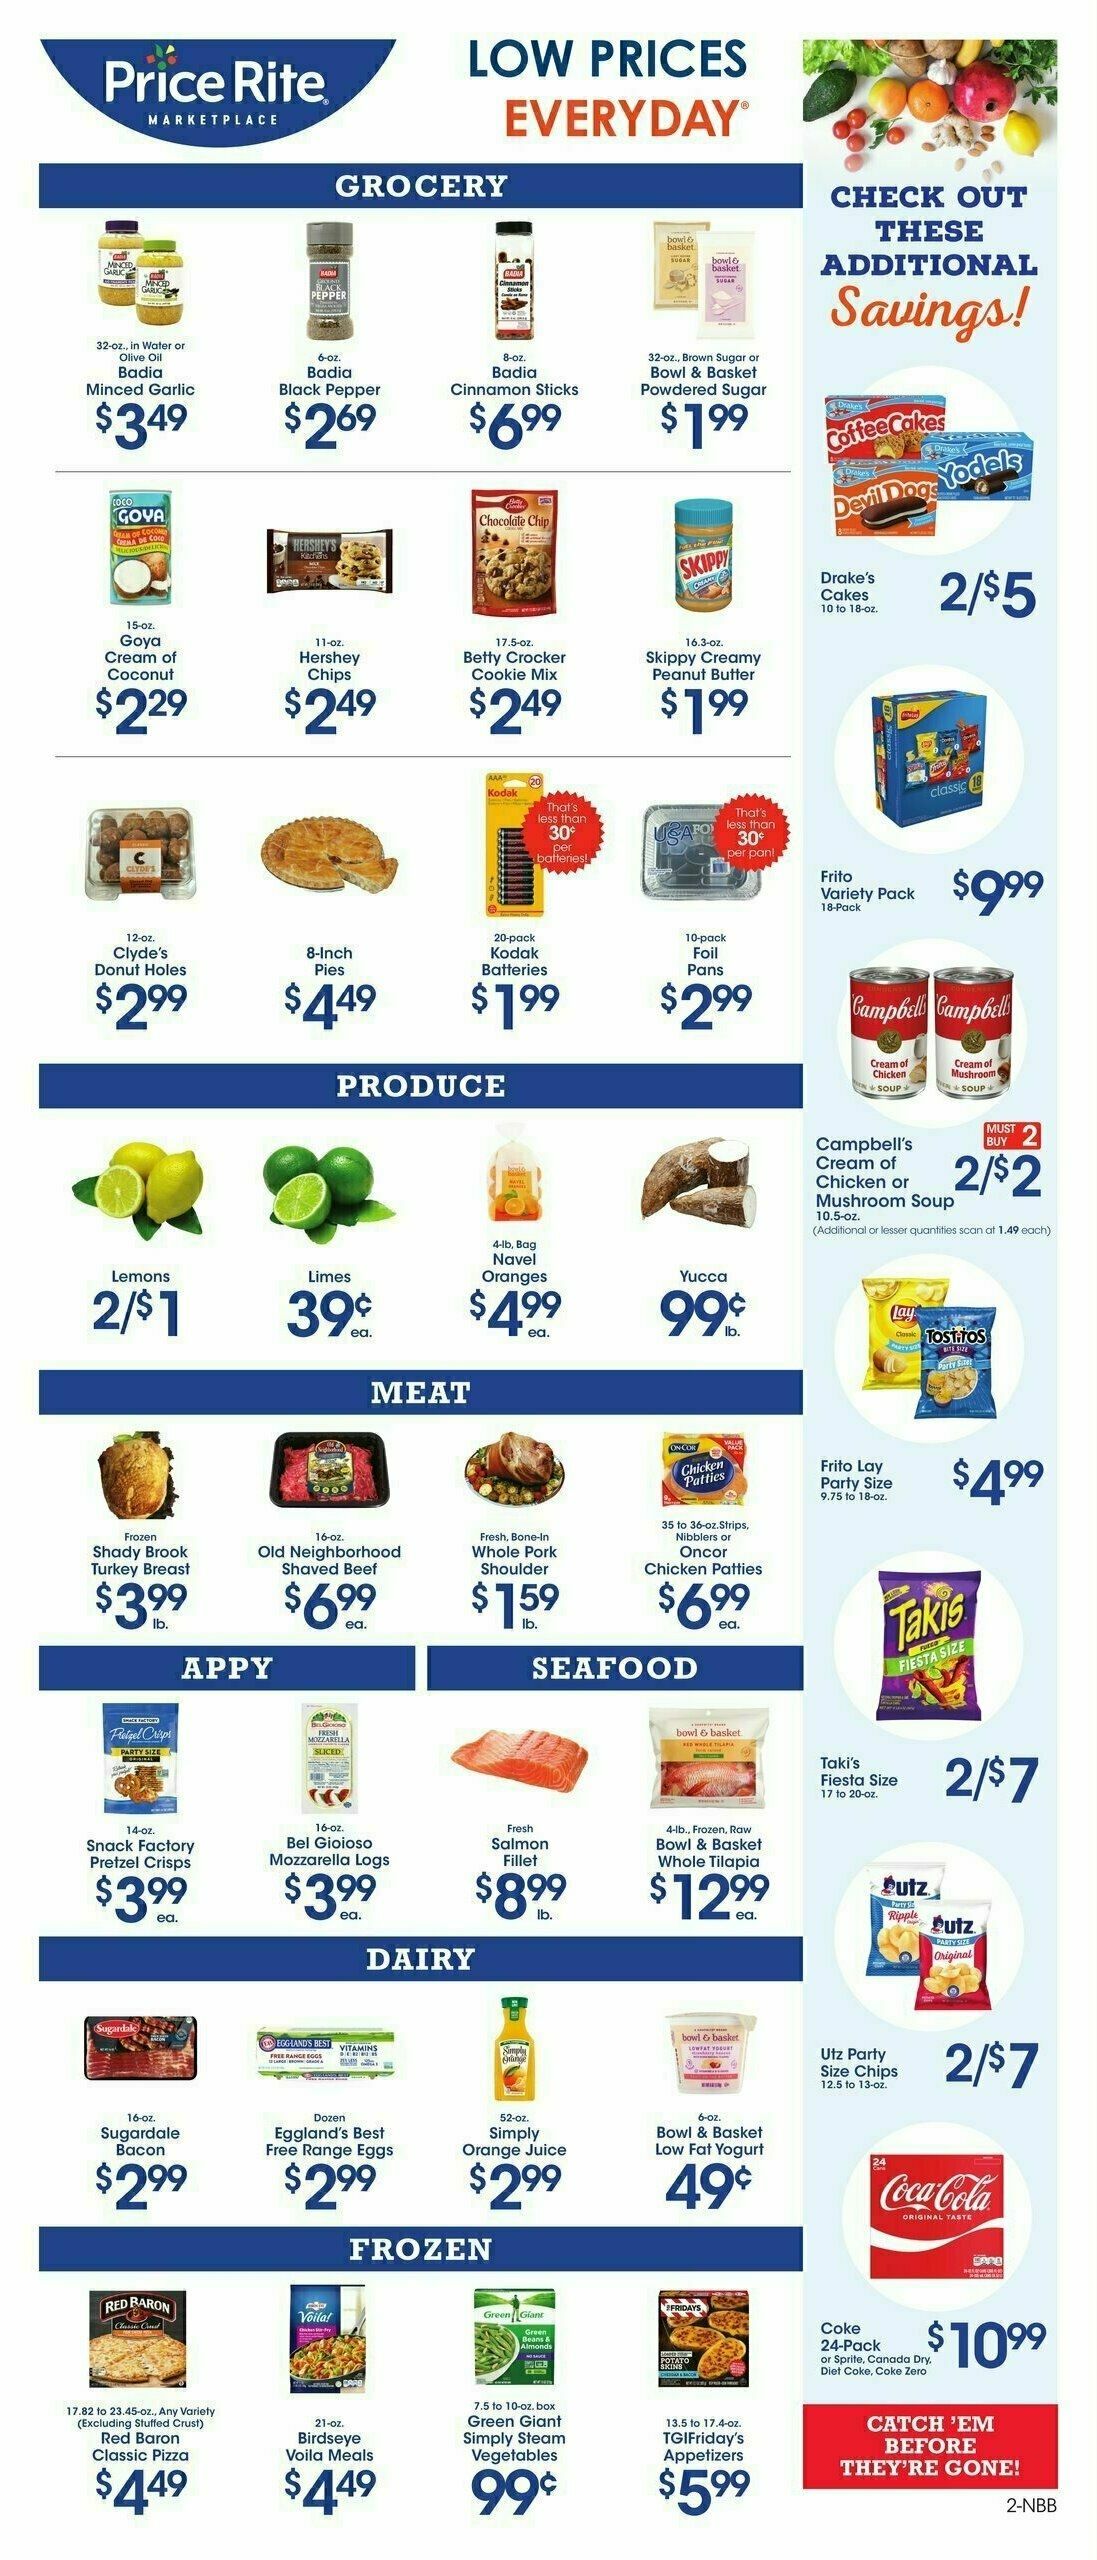 Price Rite Weekly Ad from December 8